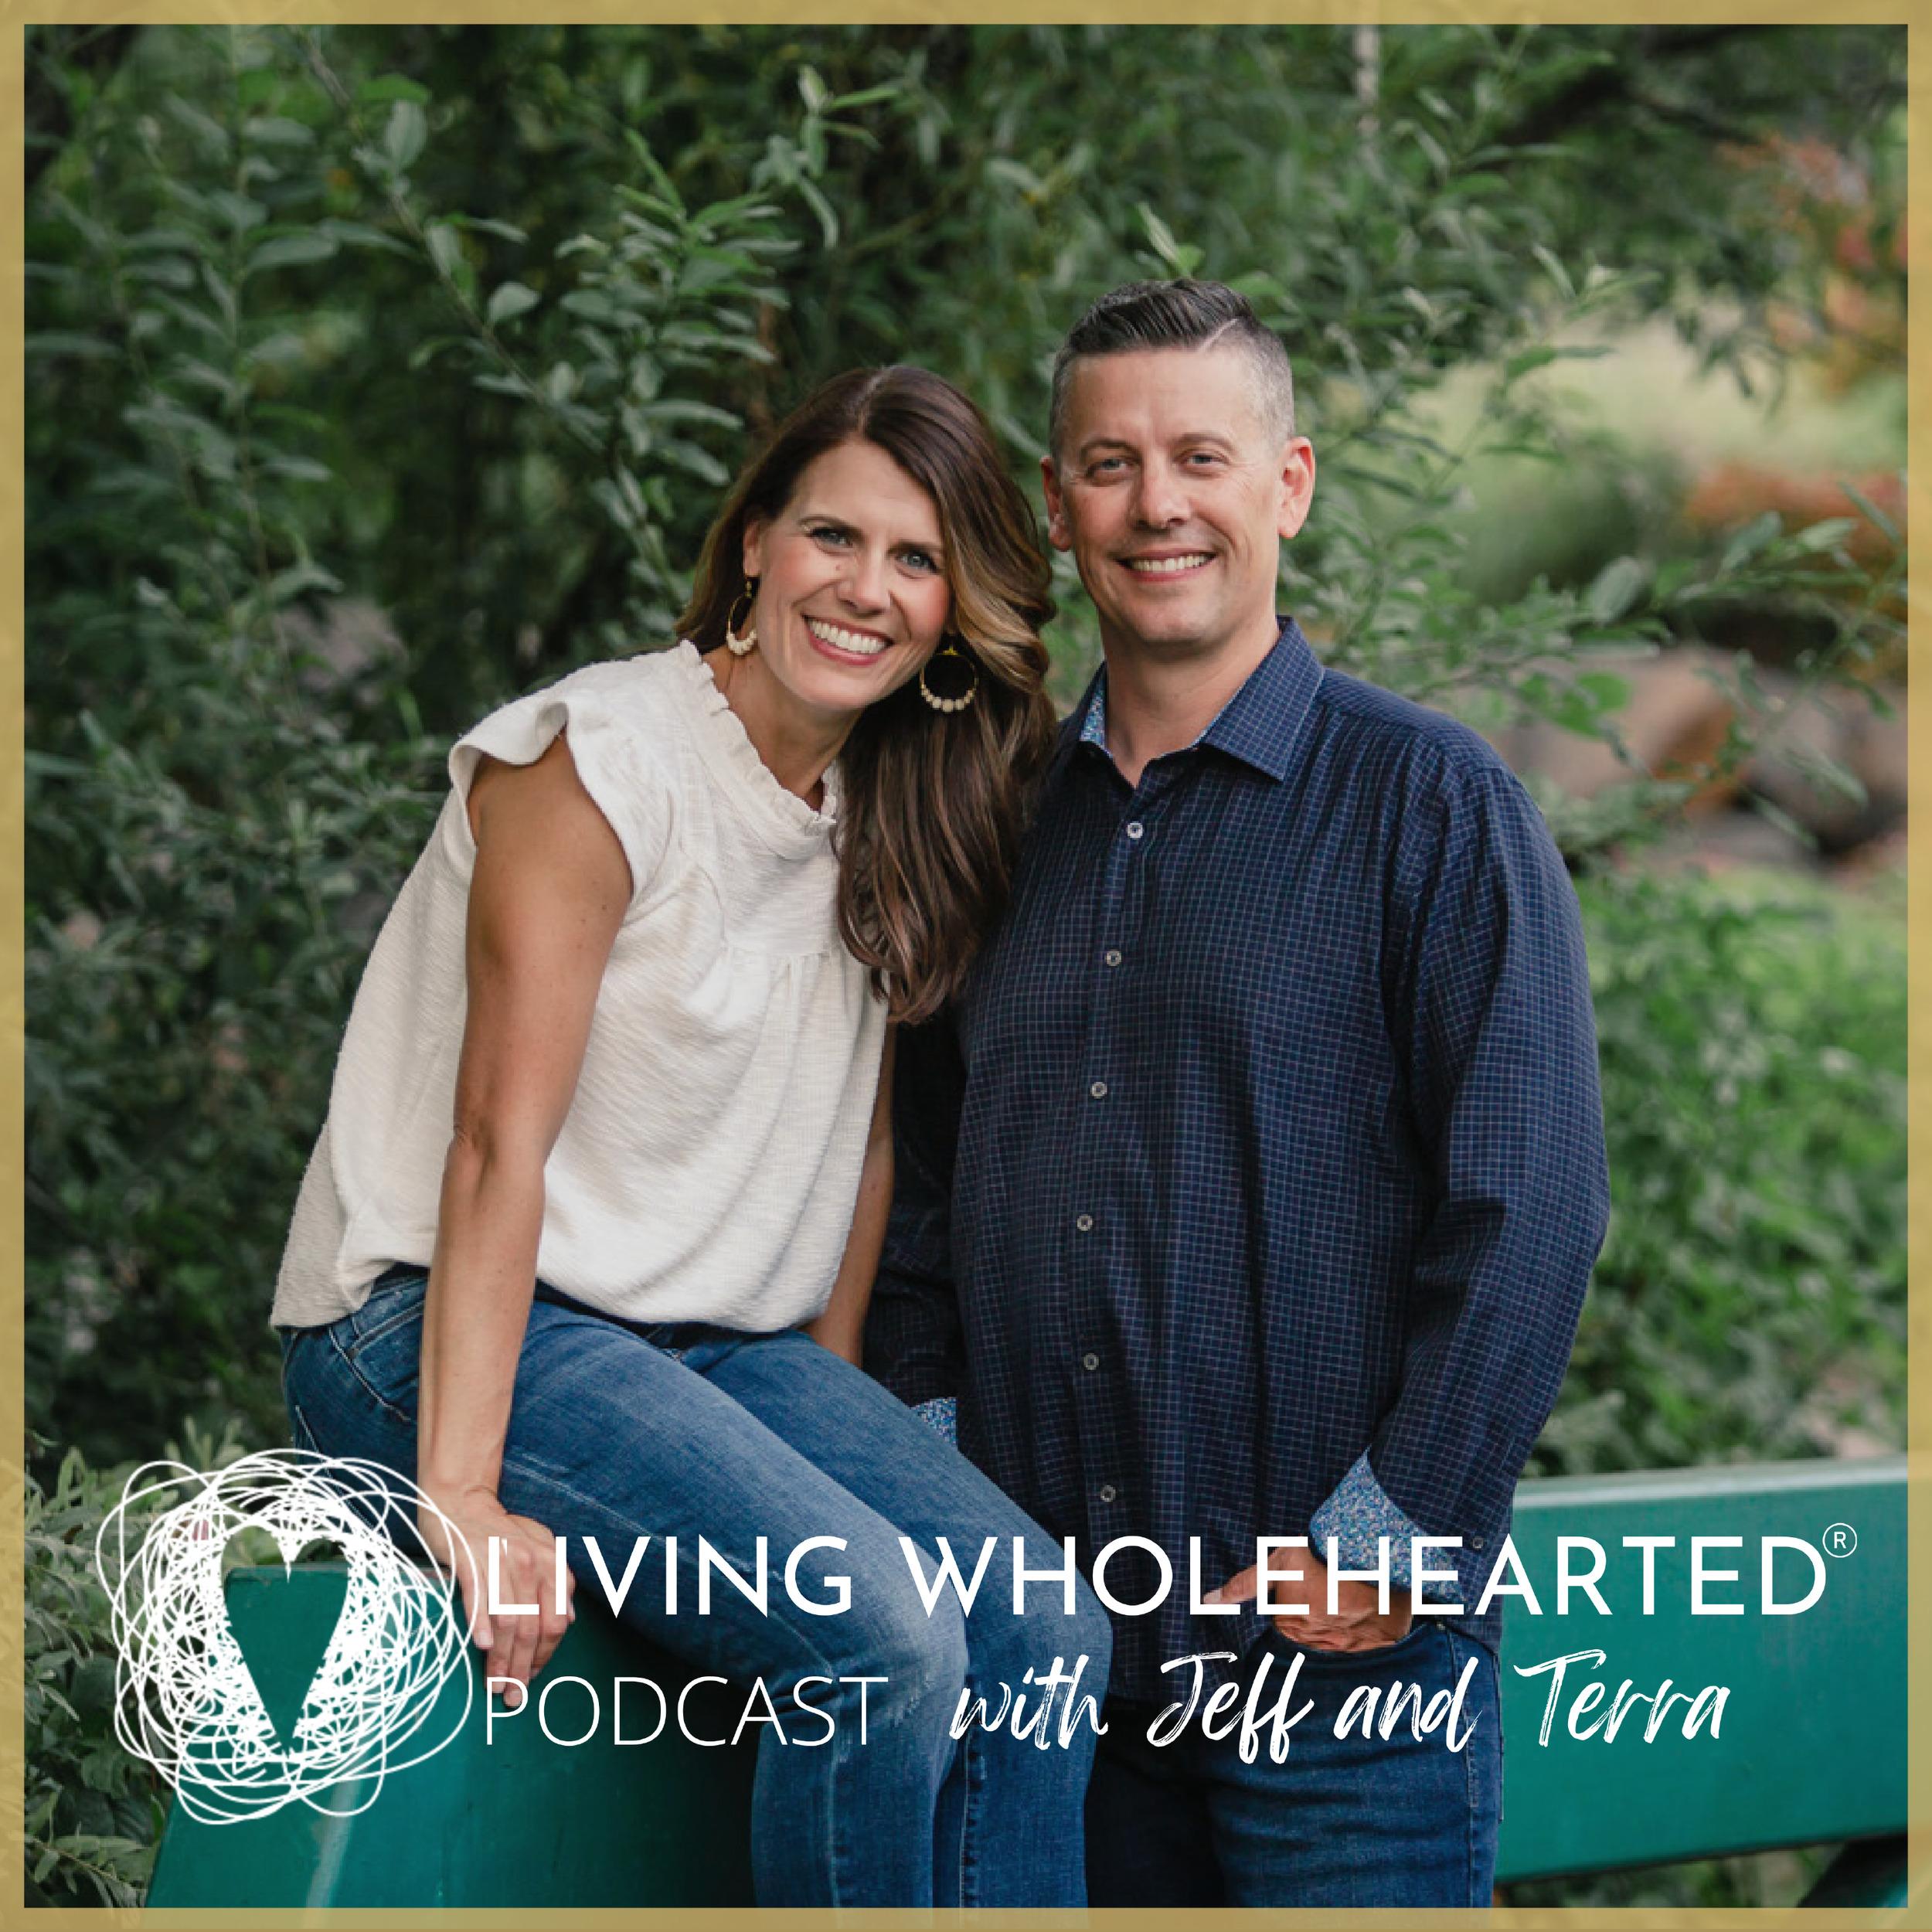 Living Wholehearted Podcast With Jeff and Terra